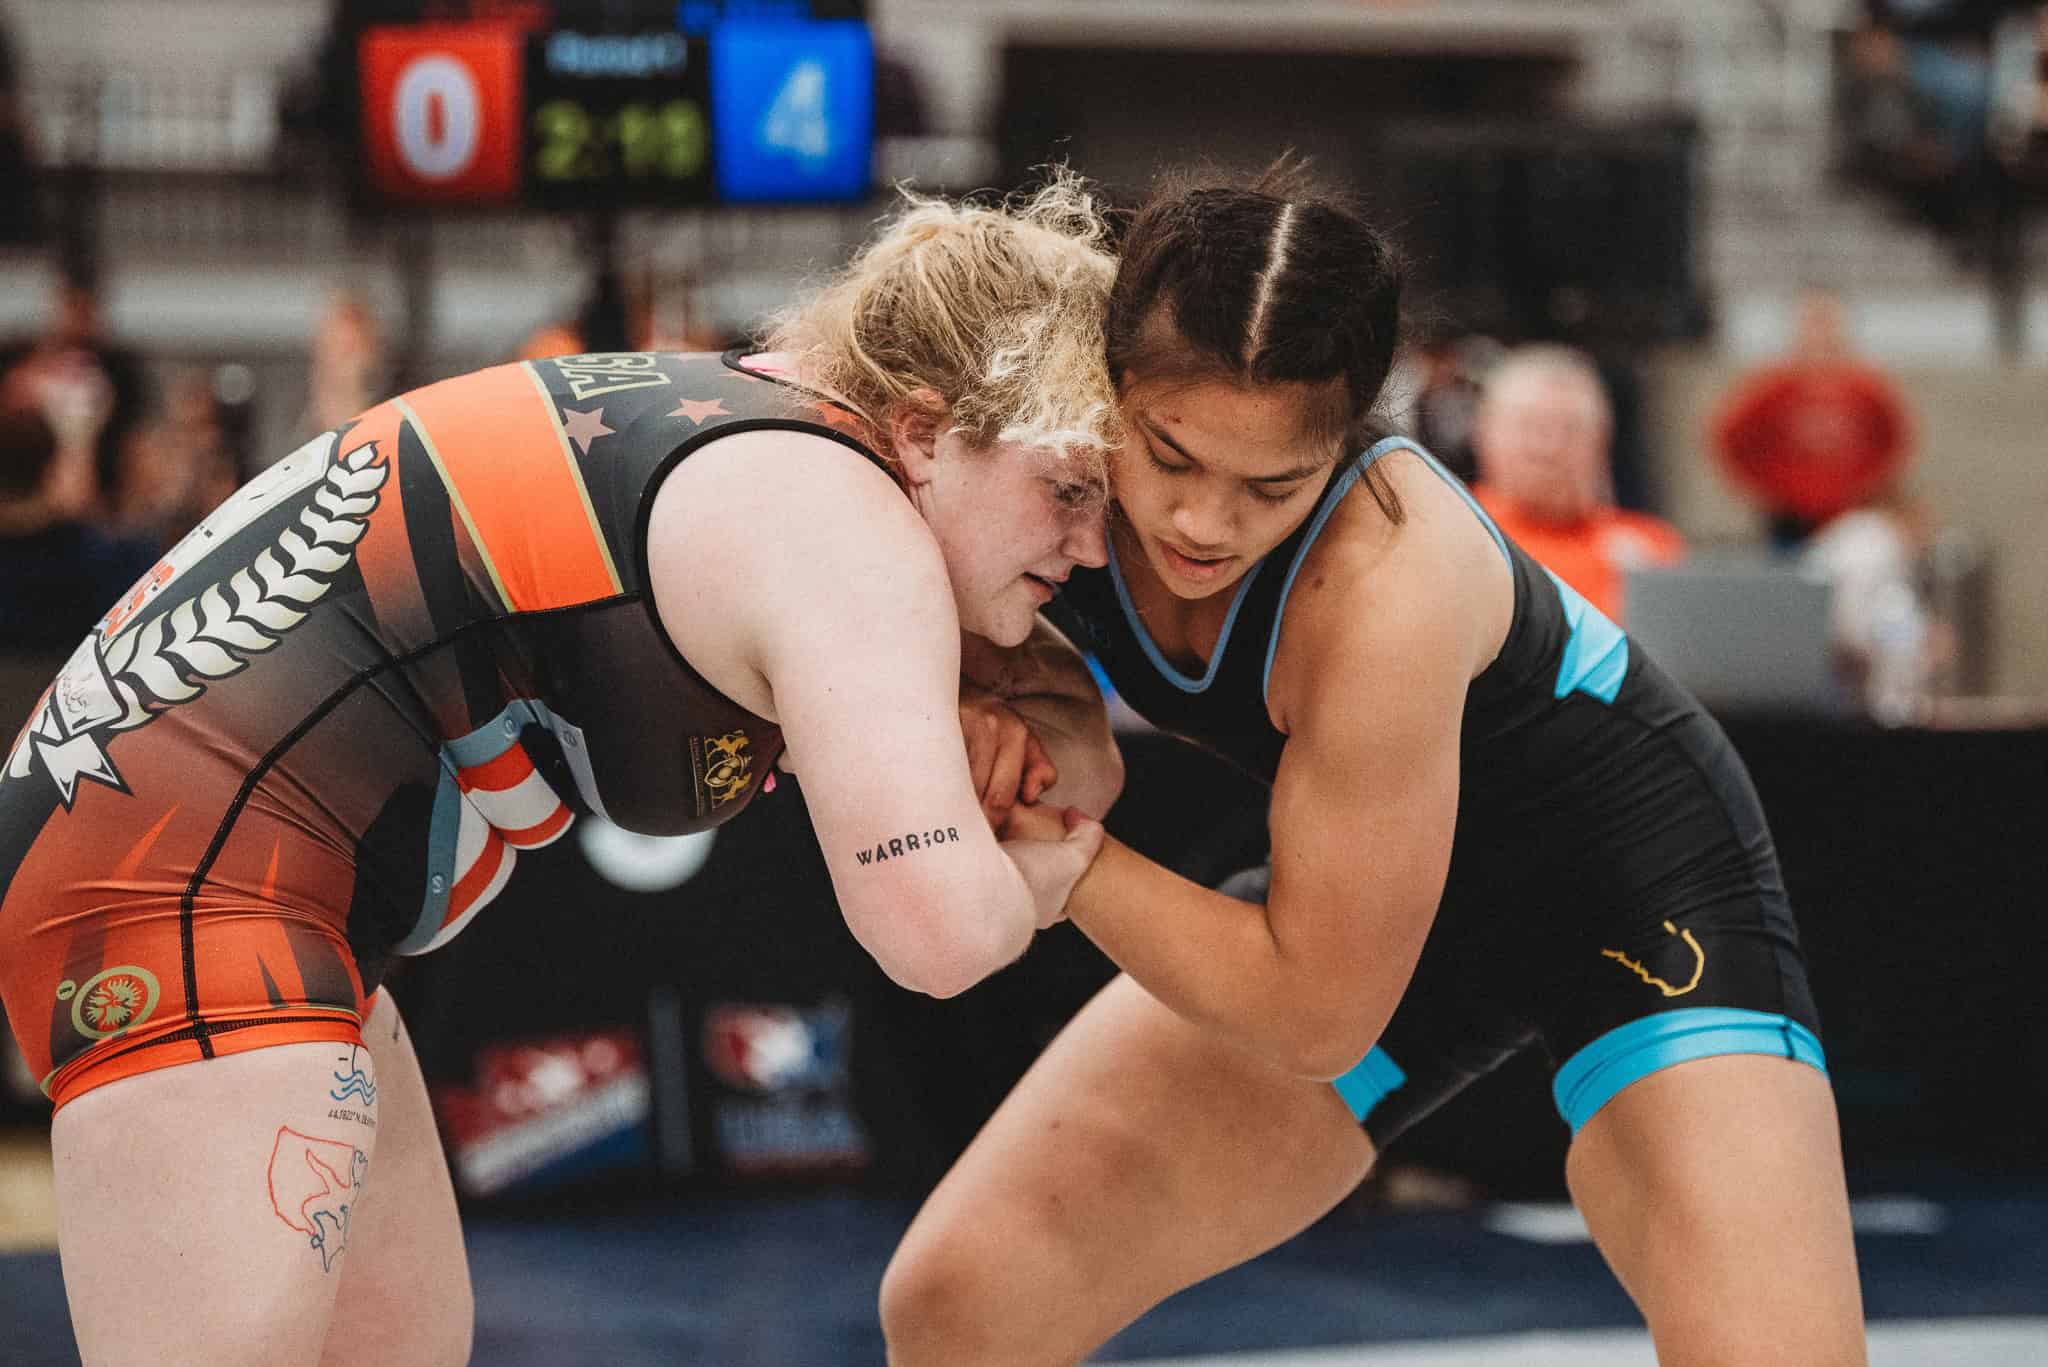 Grace Leota (right) controls her opponent with the Russian tie at Women's Nationals in Spokane, WA. [Photo by Cynthia Leota]